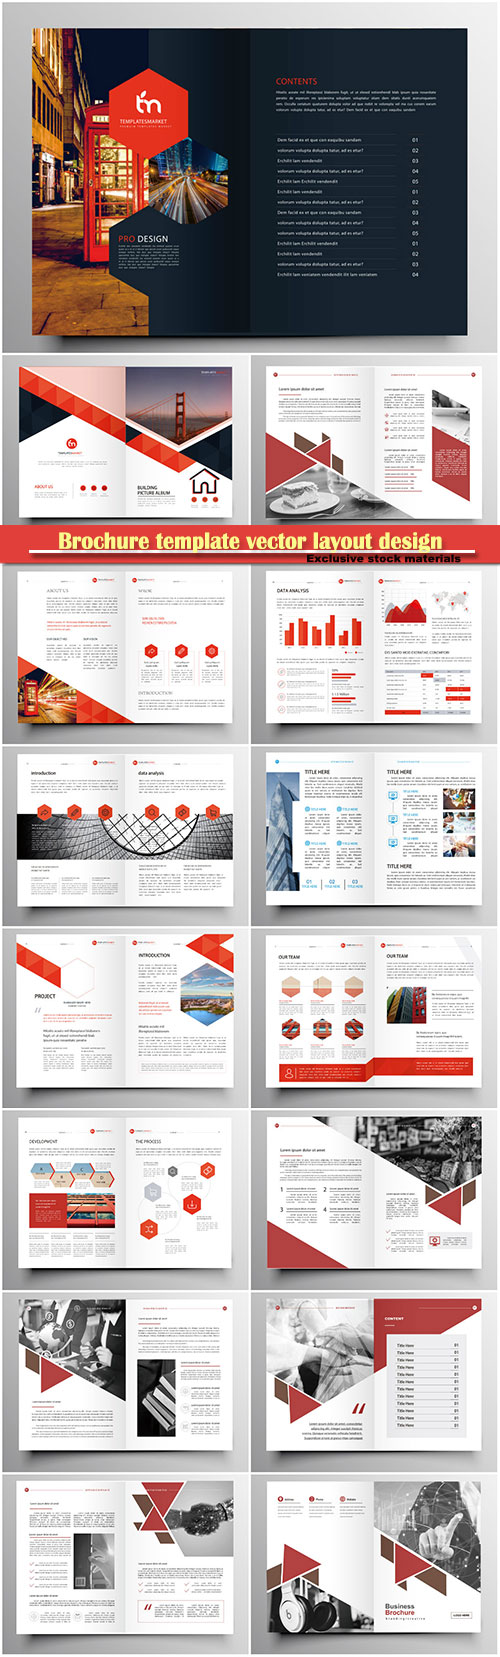 Brochure template vector layout design, corporate business annual report, magazine, flyer mockup # 130